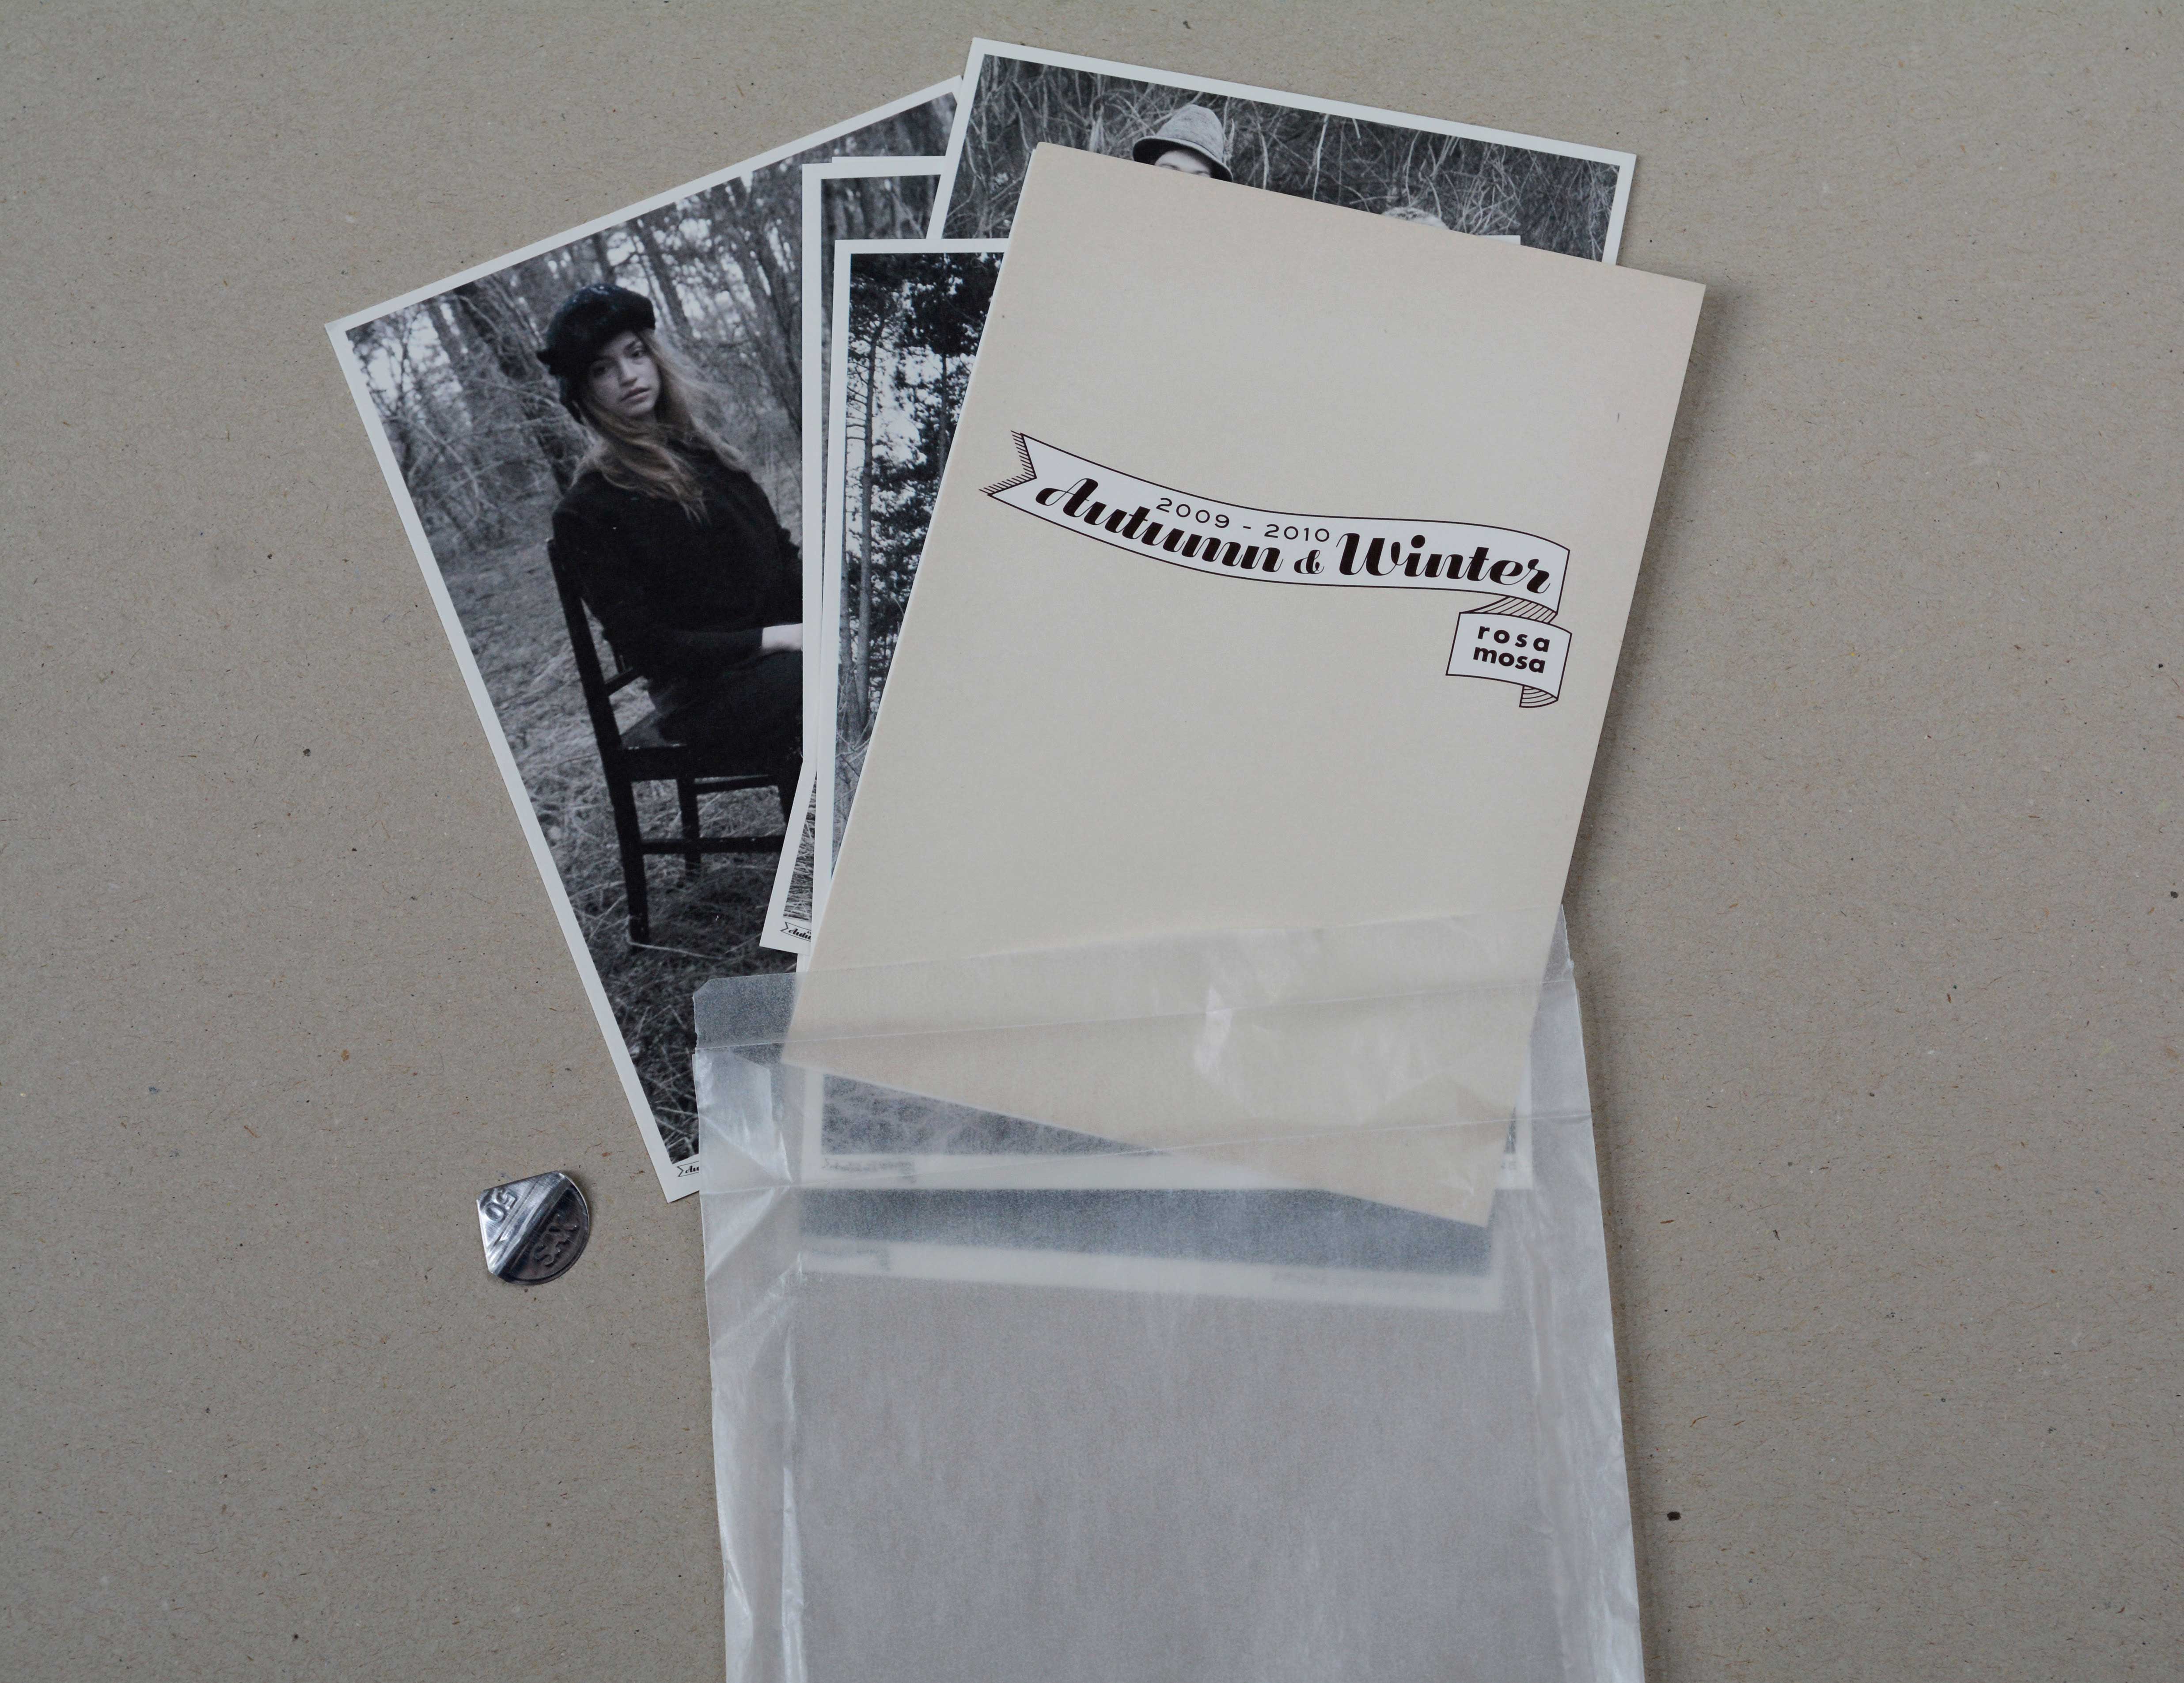 Set of postcards pulled out of transparent paper bag. Top card shows graphical element with title.